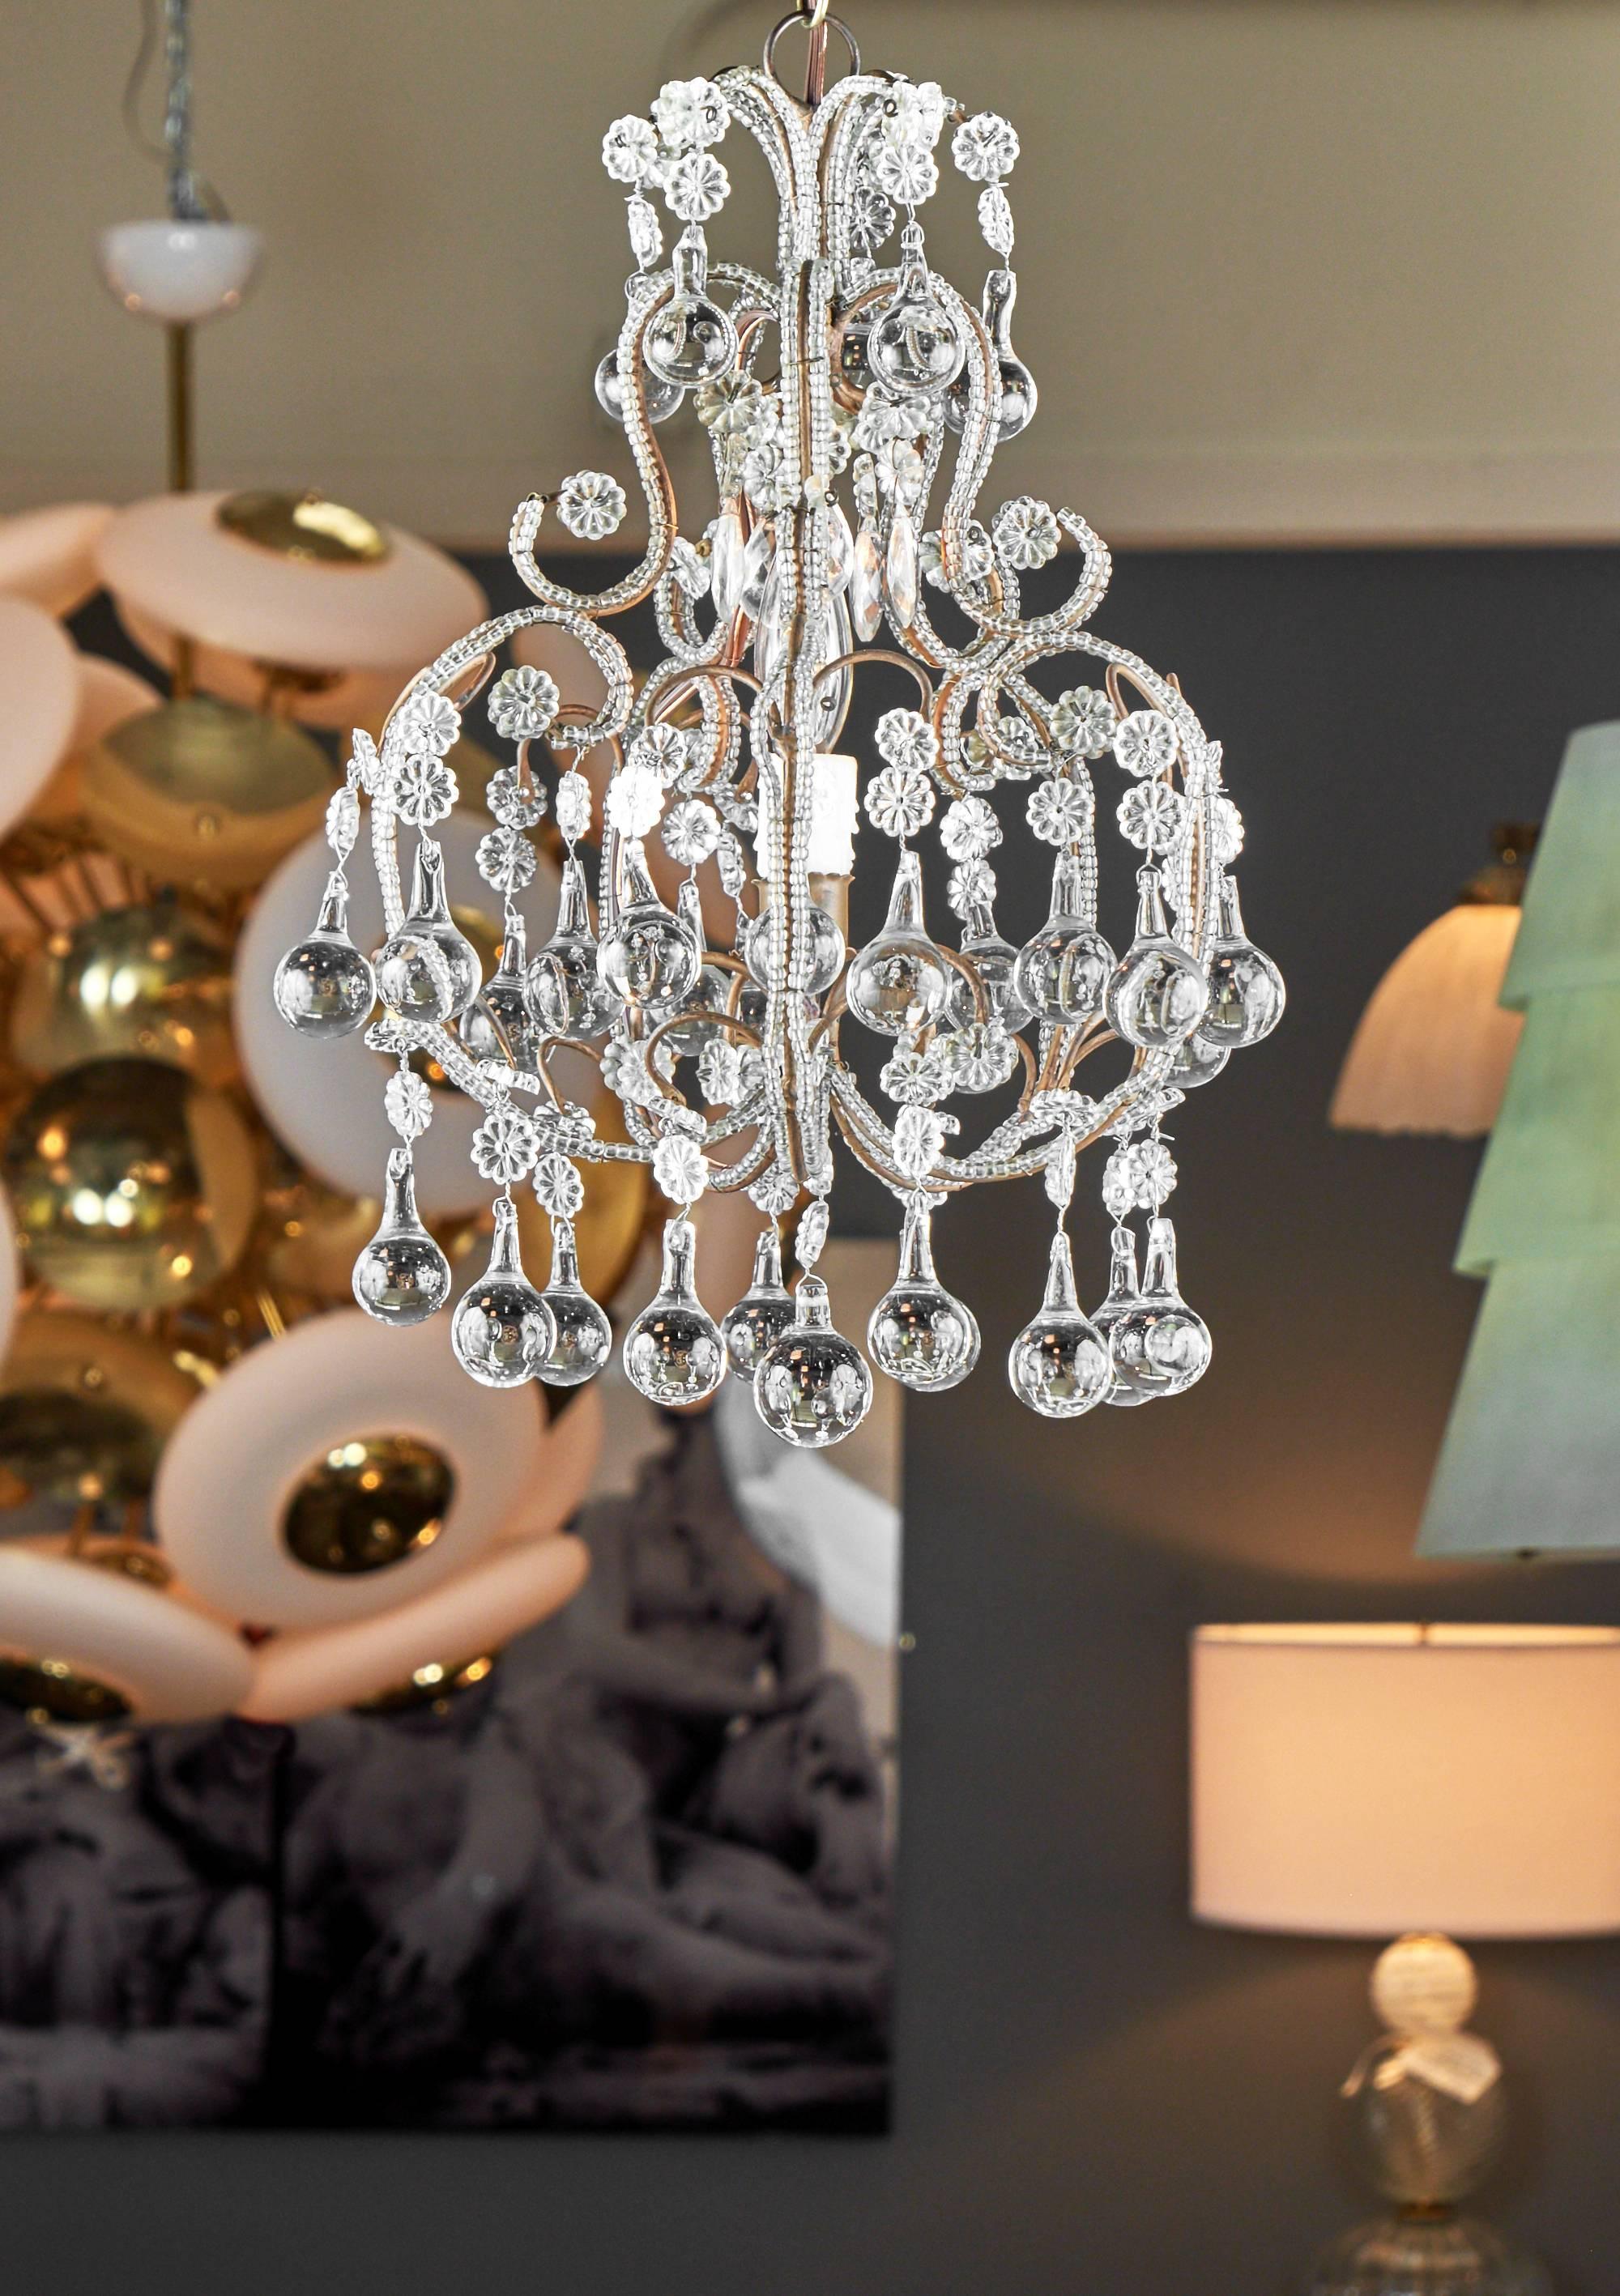 Glamorous and elegant crystal chandelier from Genova, on the Ligurian coast of Italy, gold leafed metal structure covered with crystal beads and a rich array of crystal water drop pendants, circa 1910. This charming piece has been rewired for the US